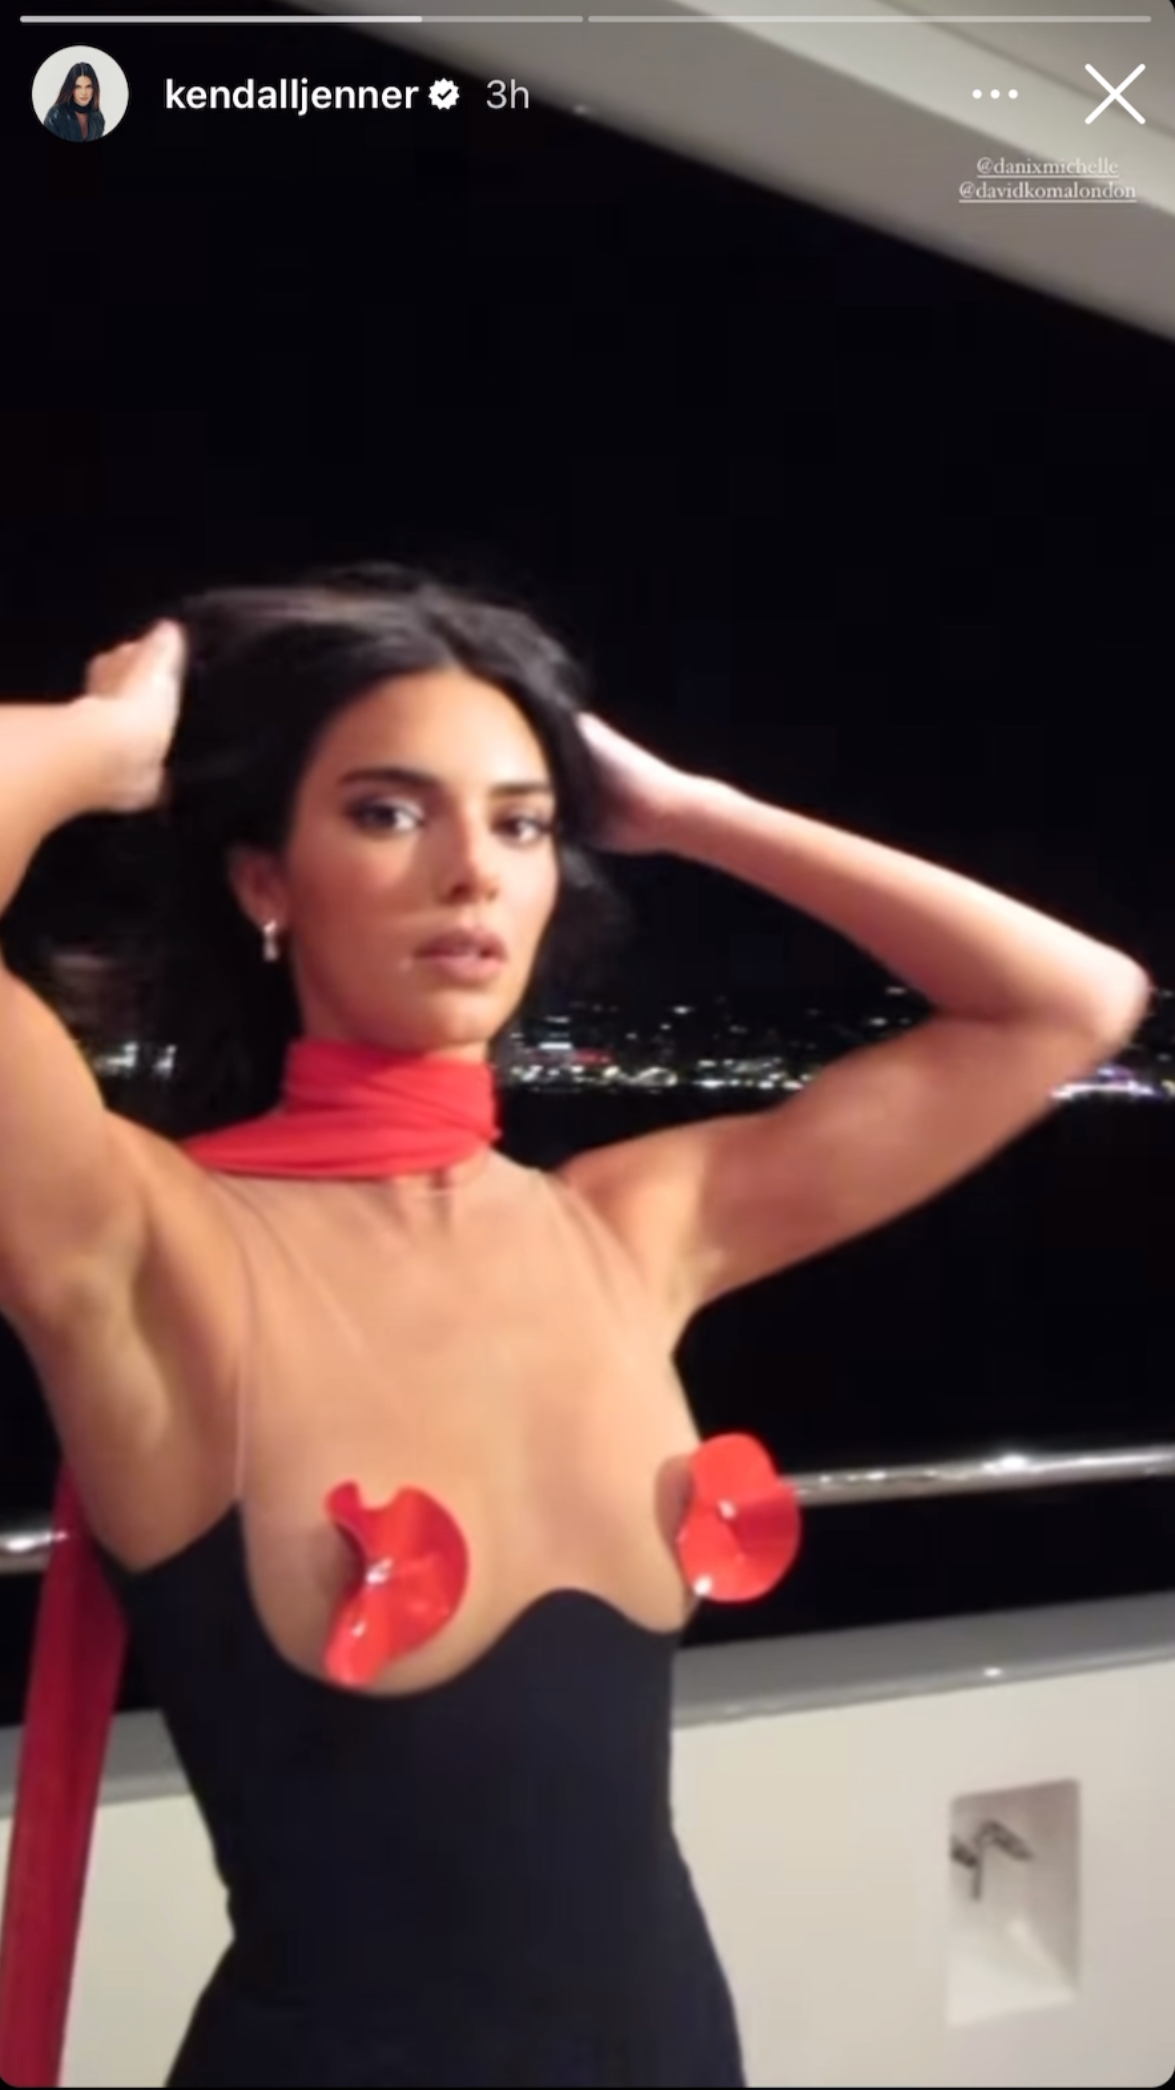 bobbie paulus recommends kendall jenner leaked pictures pic